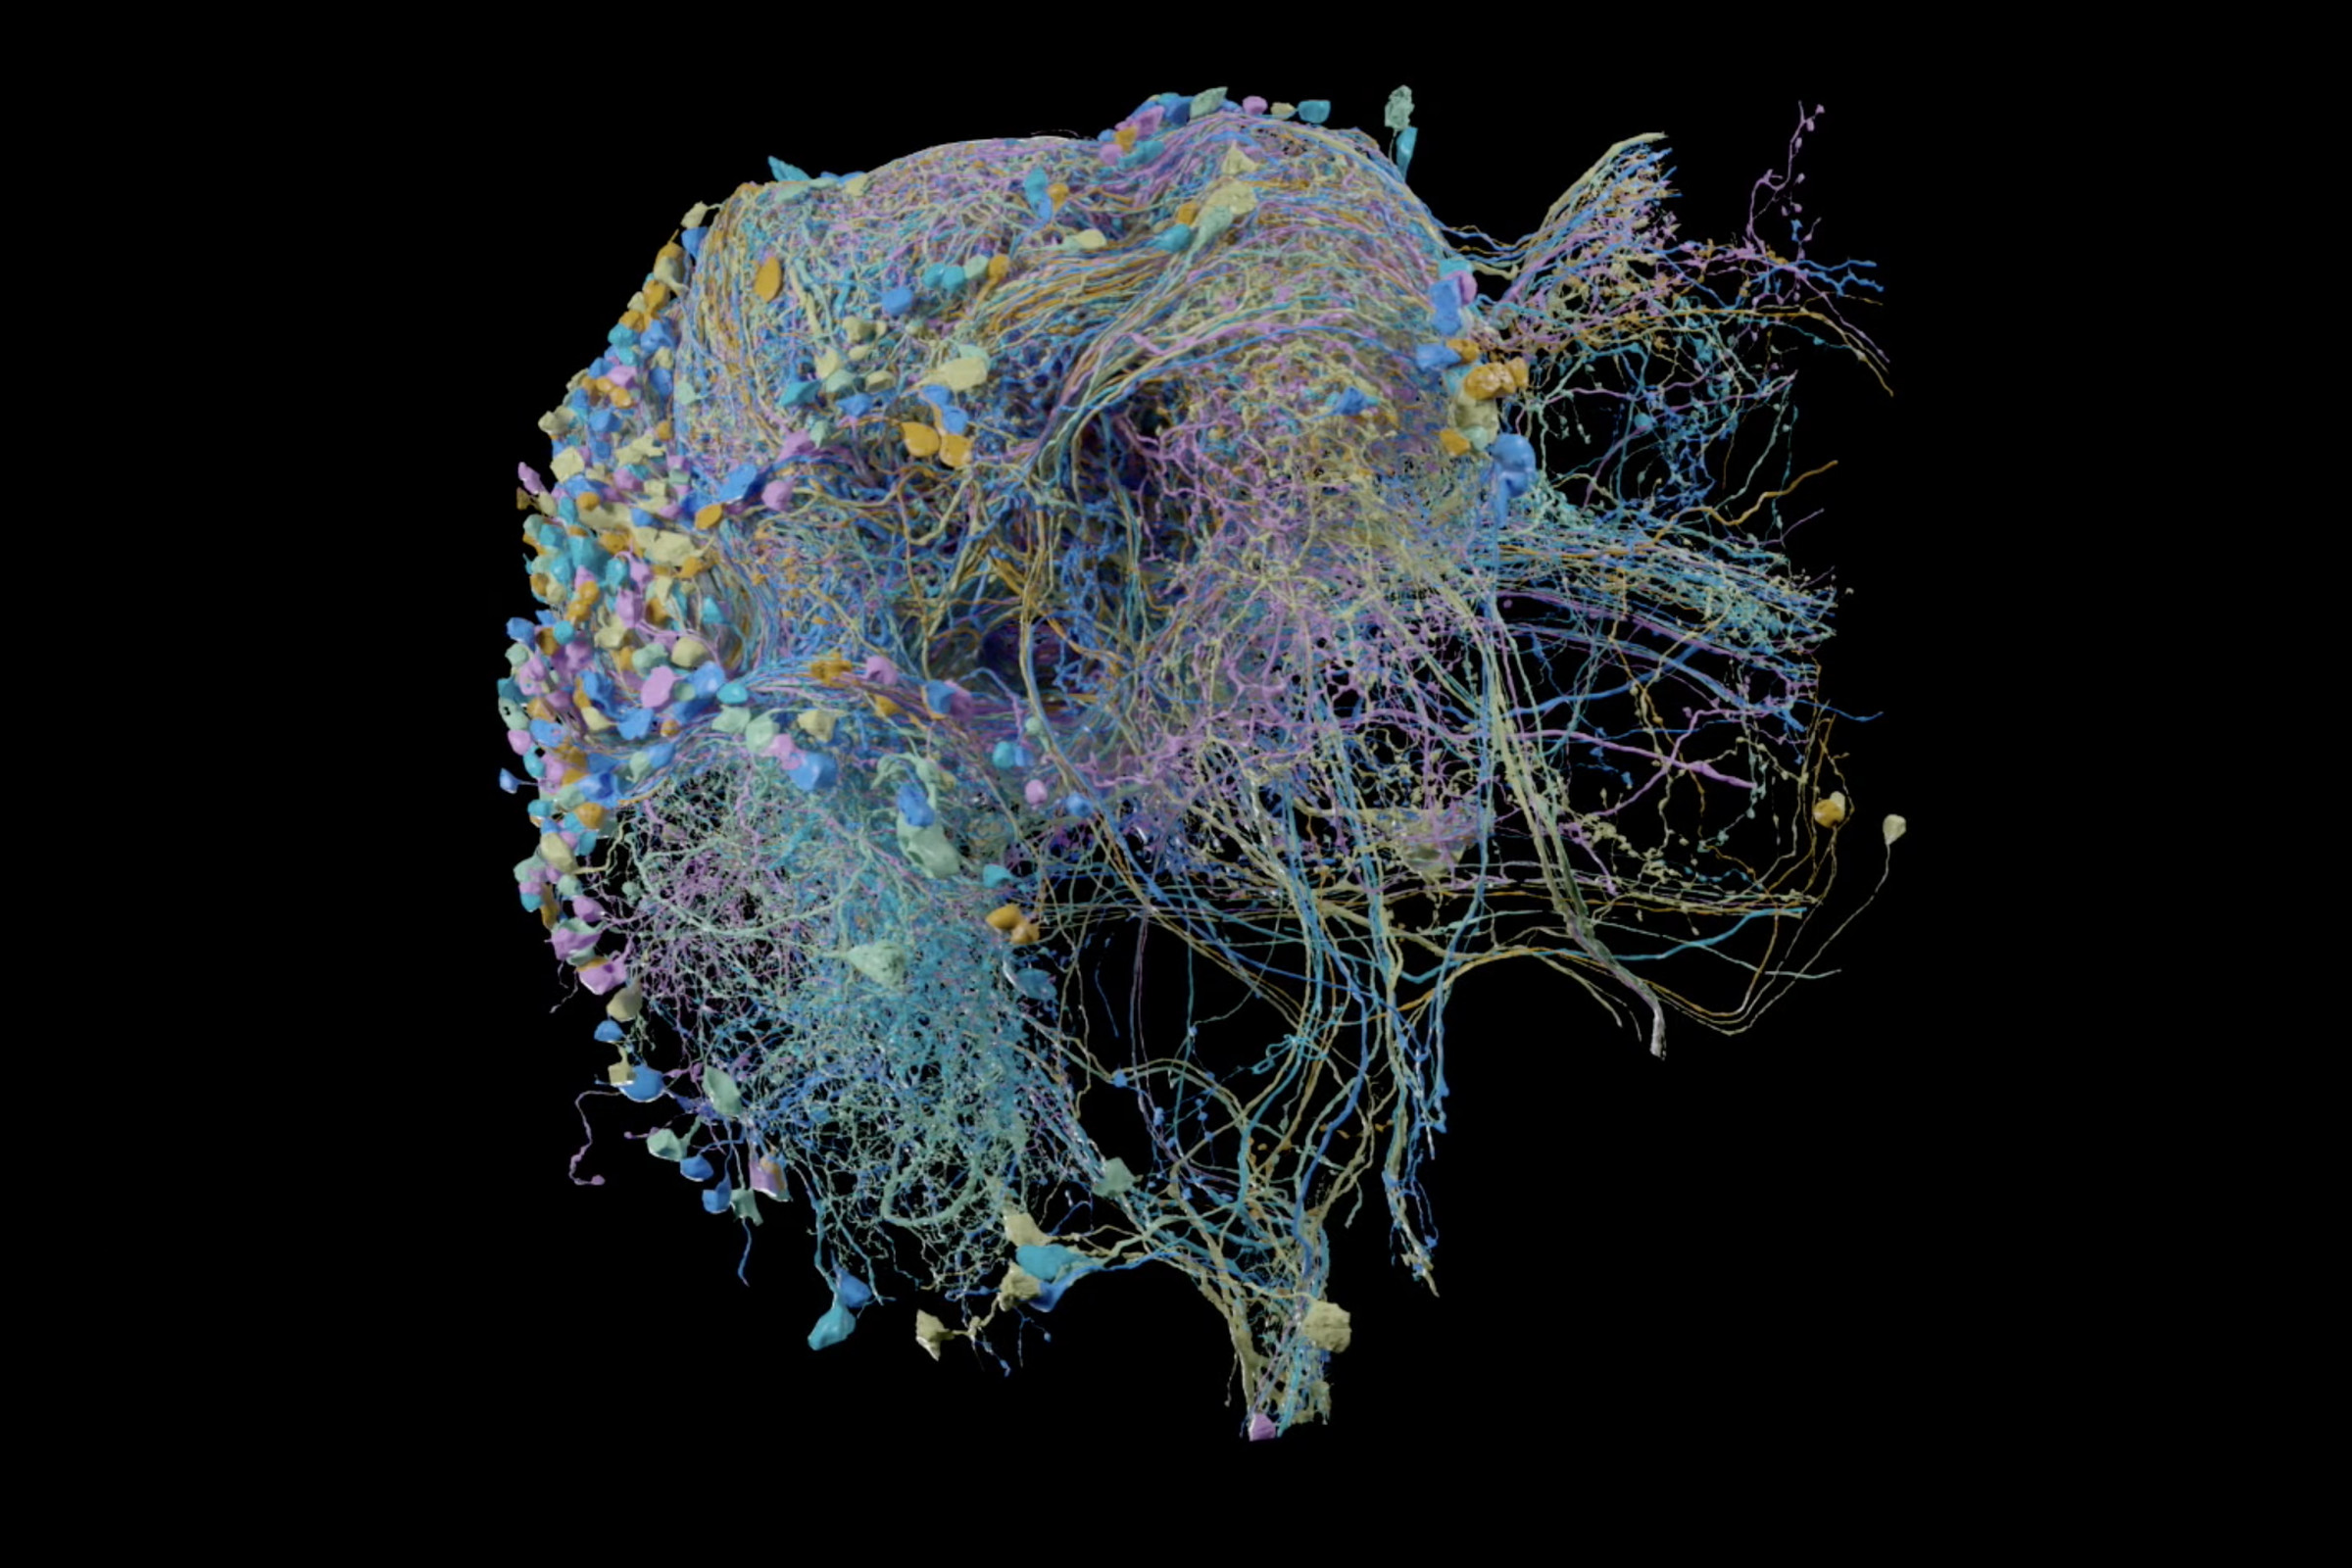 The new ‘connectome’ maps some 25,000 neurons in a fruit fly’s brain, a portion of which are shown here. 